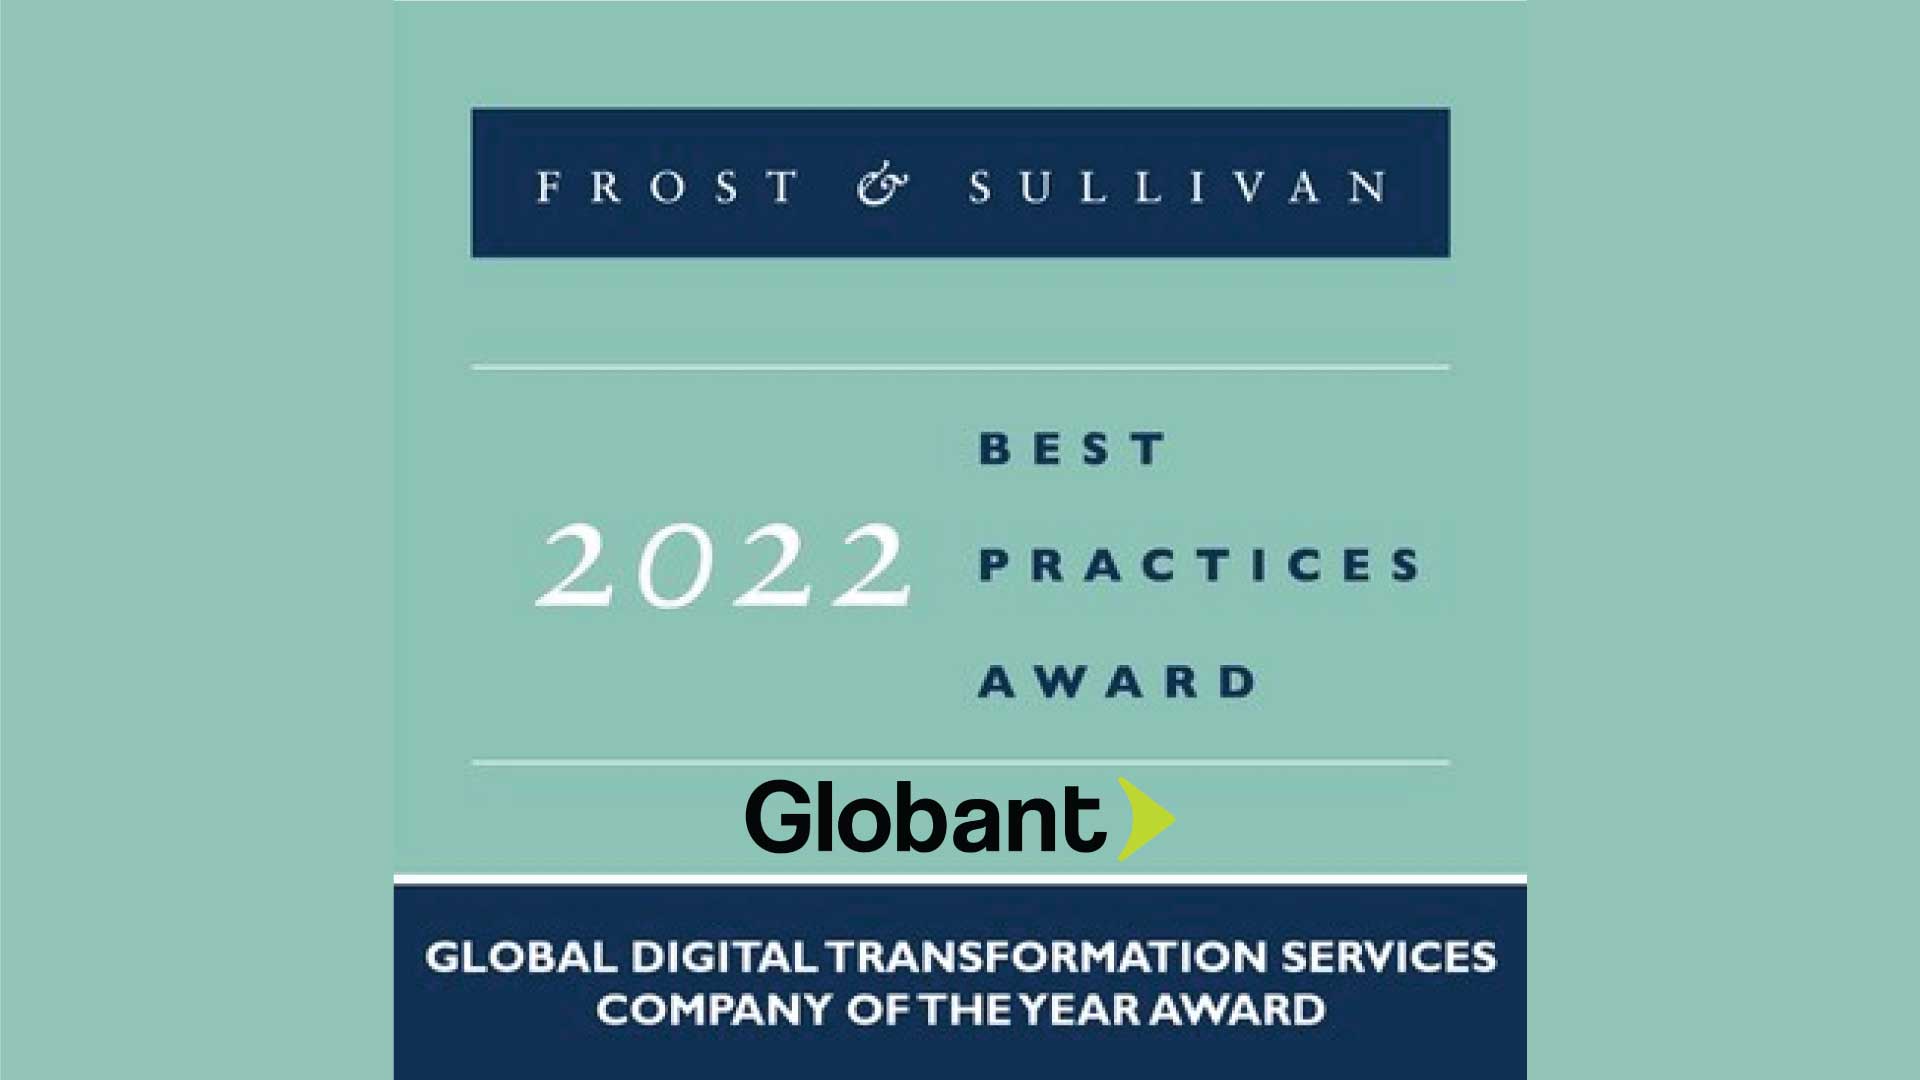 Globant Recognized by Frost & Sullivan with the 2022 Company of the Year Award in the Global Digital Transformation Services Industry